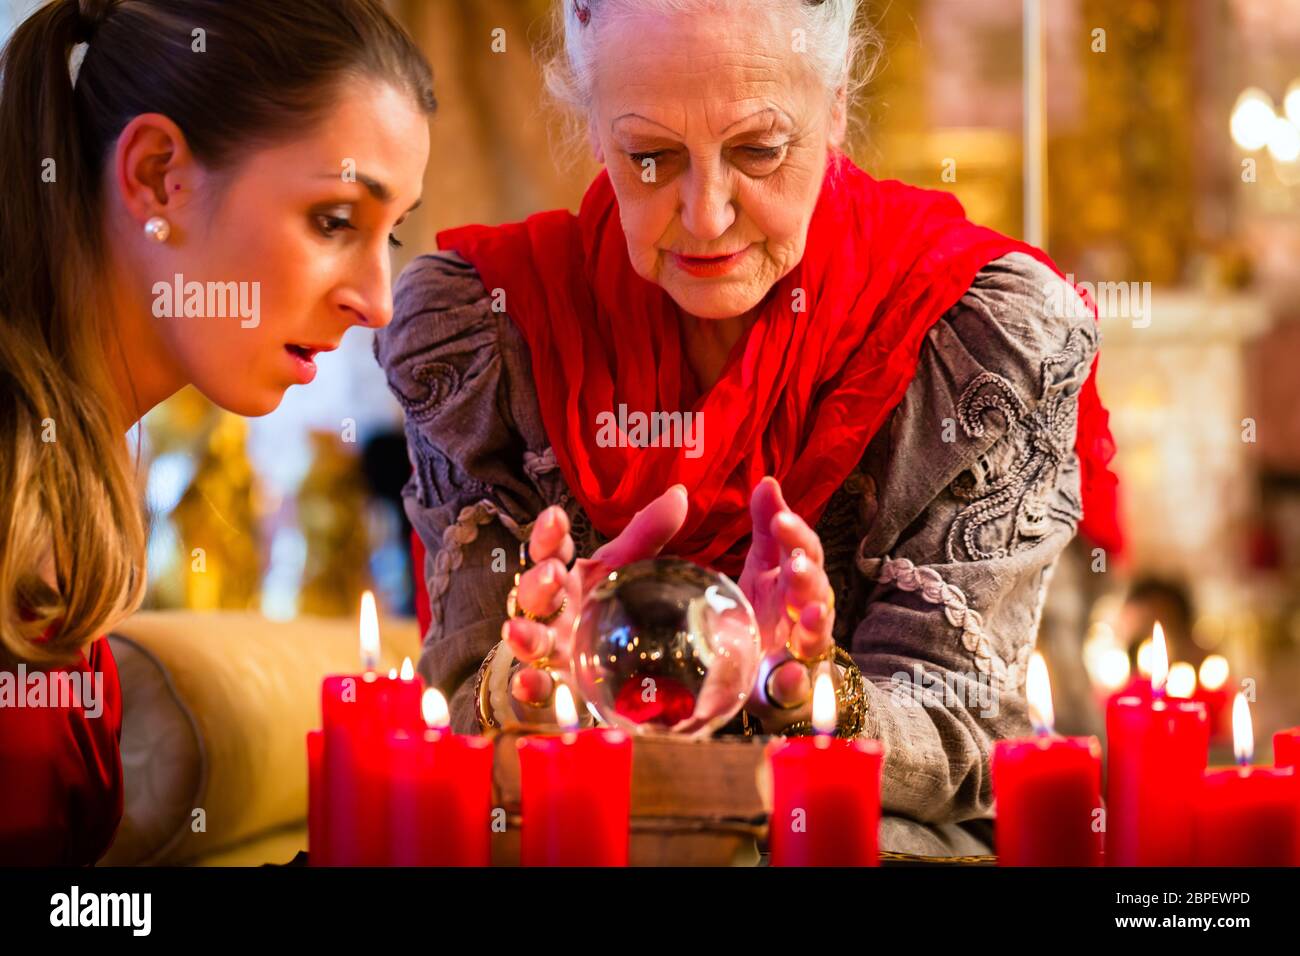 Female Fortuneteller or esoteric Oracle, sees in the future by looking into their crystal ball answering questions from client Stock Photo